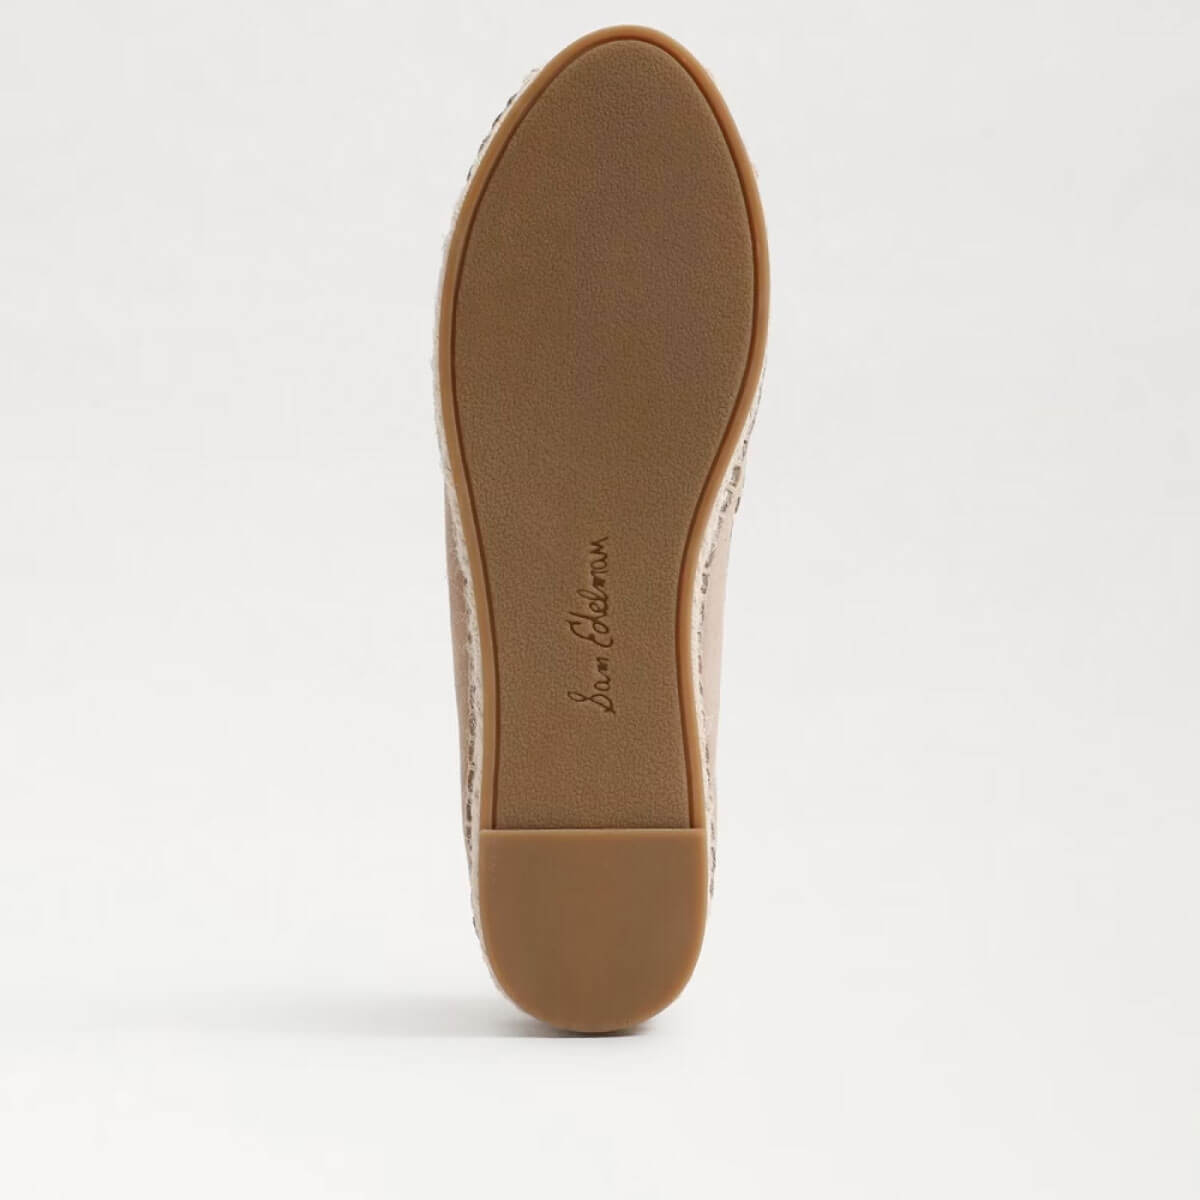 Sam Edelman Kai Espadrille Flat Loafer taupe bottom | MILK MONEY milkmoney.co | cute shoes for women. ladies shoes. nice shoes for women. footwear for women. ladies shoes online. ladies footwear. womens shoes and boots. pretty shoes for women. beautiful shoes for women.